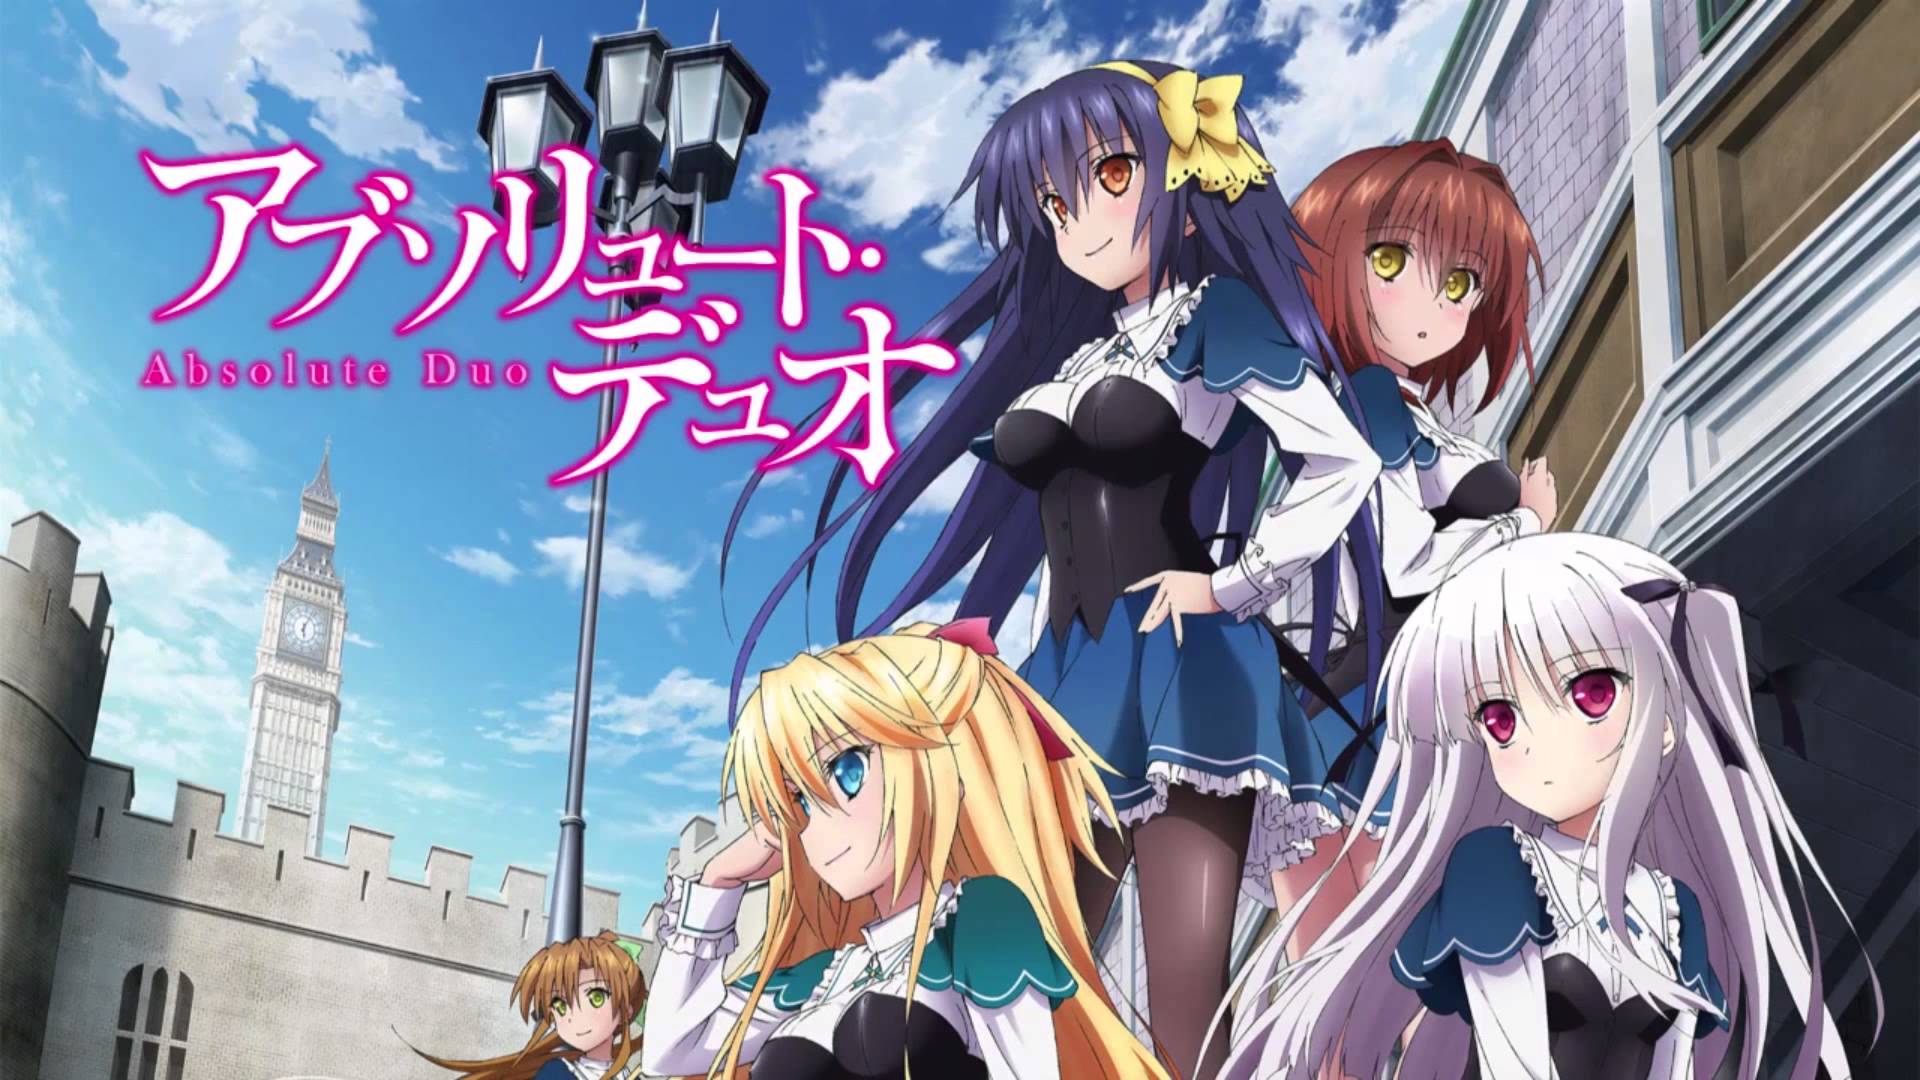 Absolute Duo #2